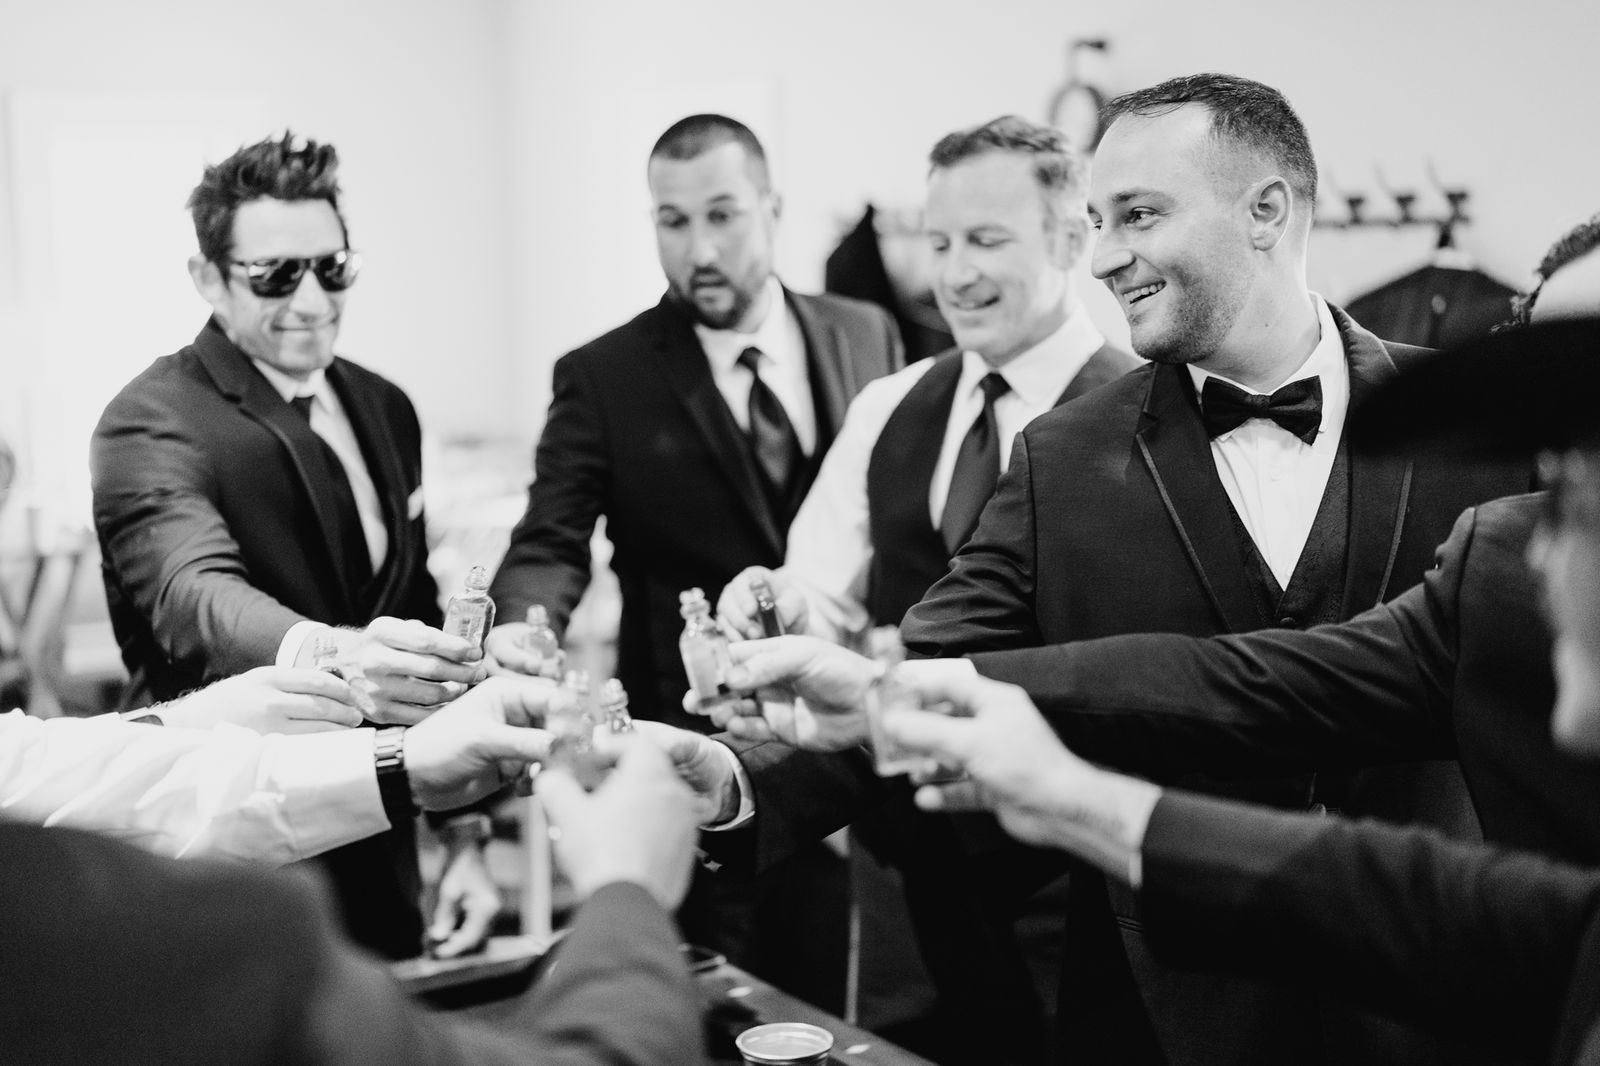 Groom and groomsman cheersing shots in black and white